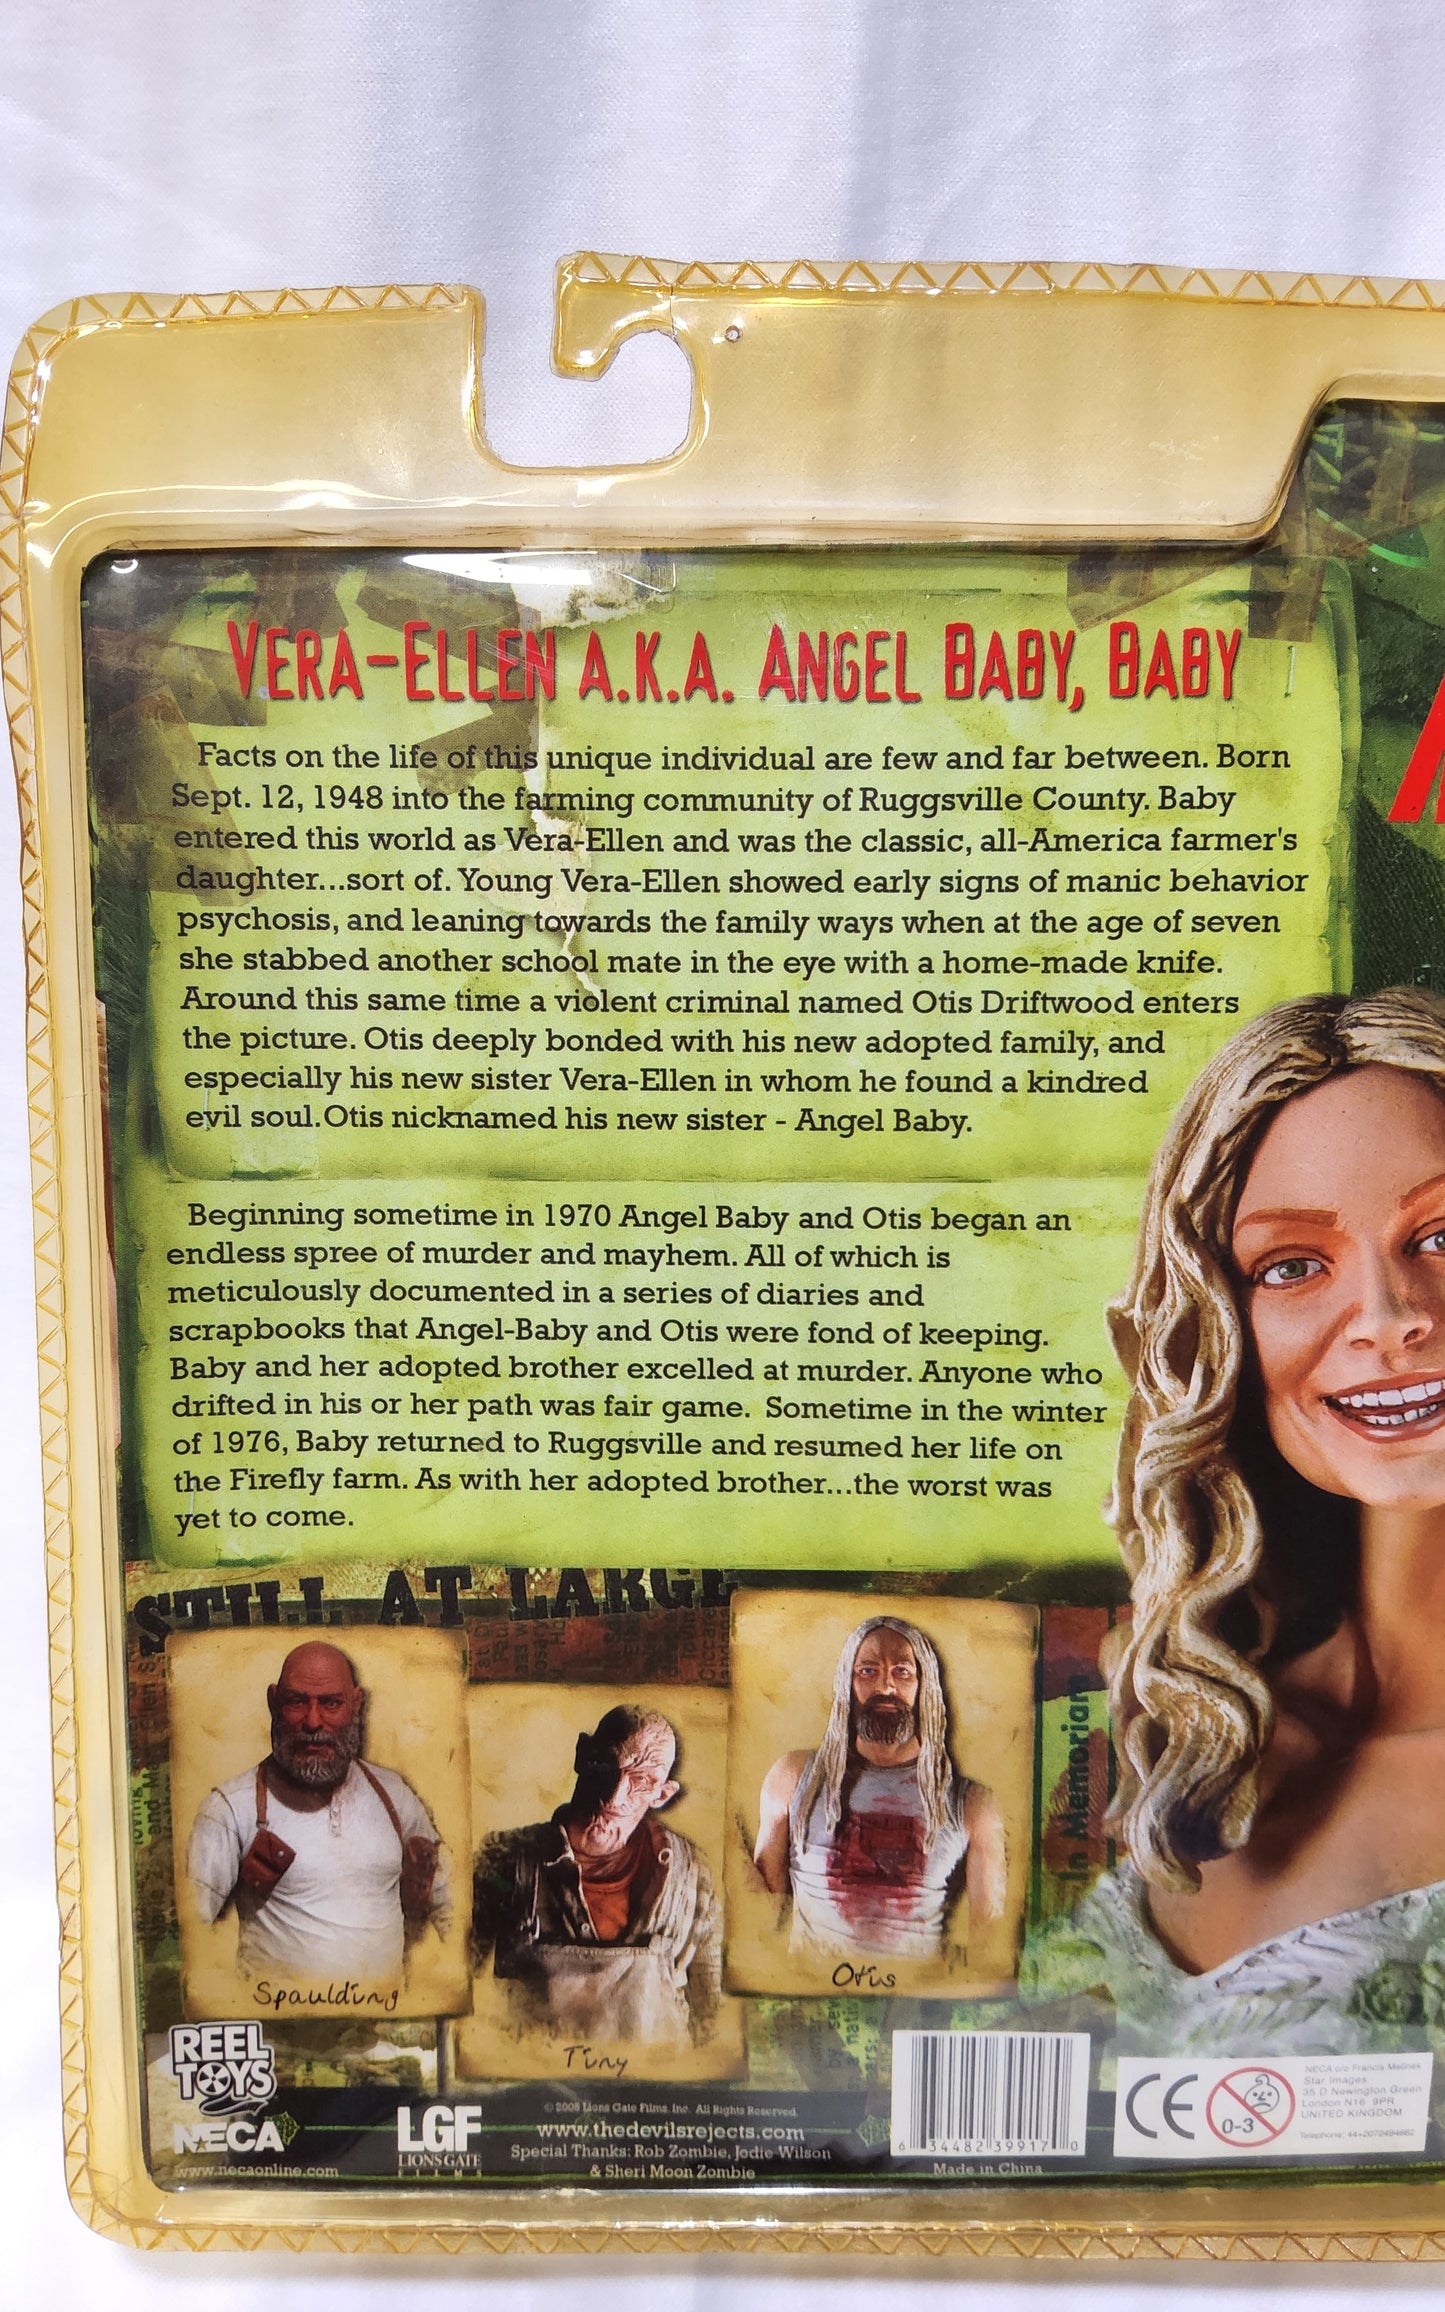 The Devil's Rejects Baby Figure NECA - Horror Collectible